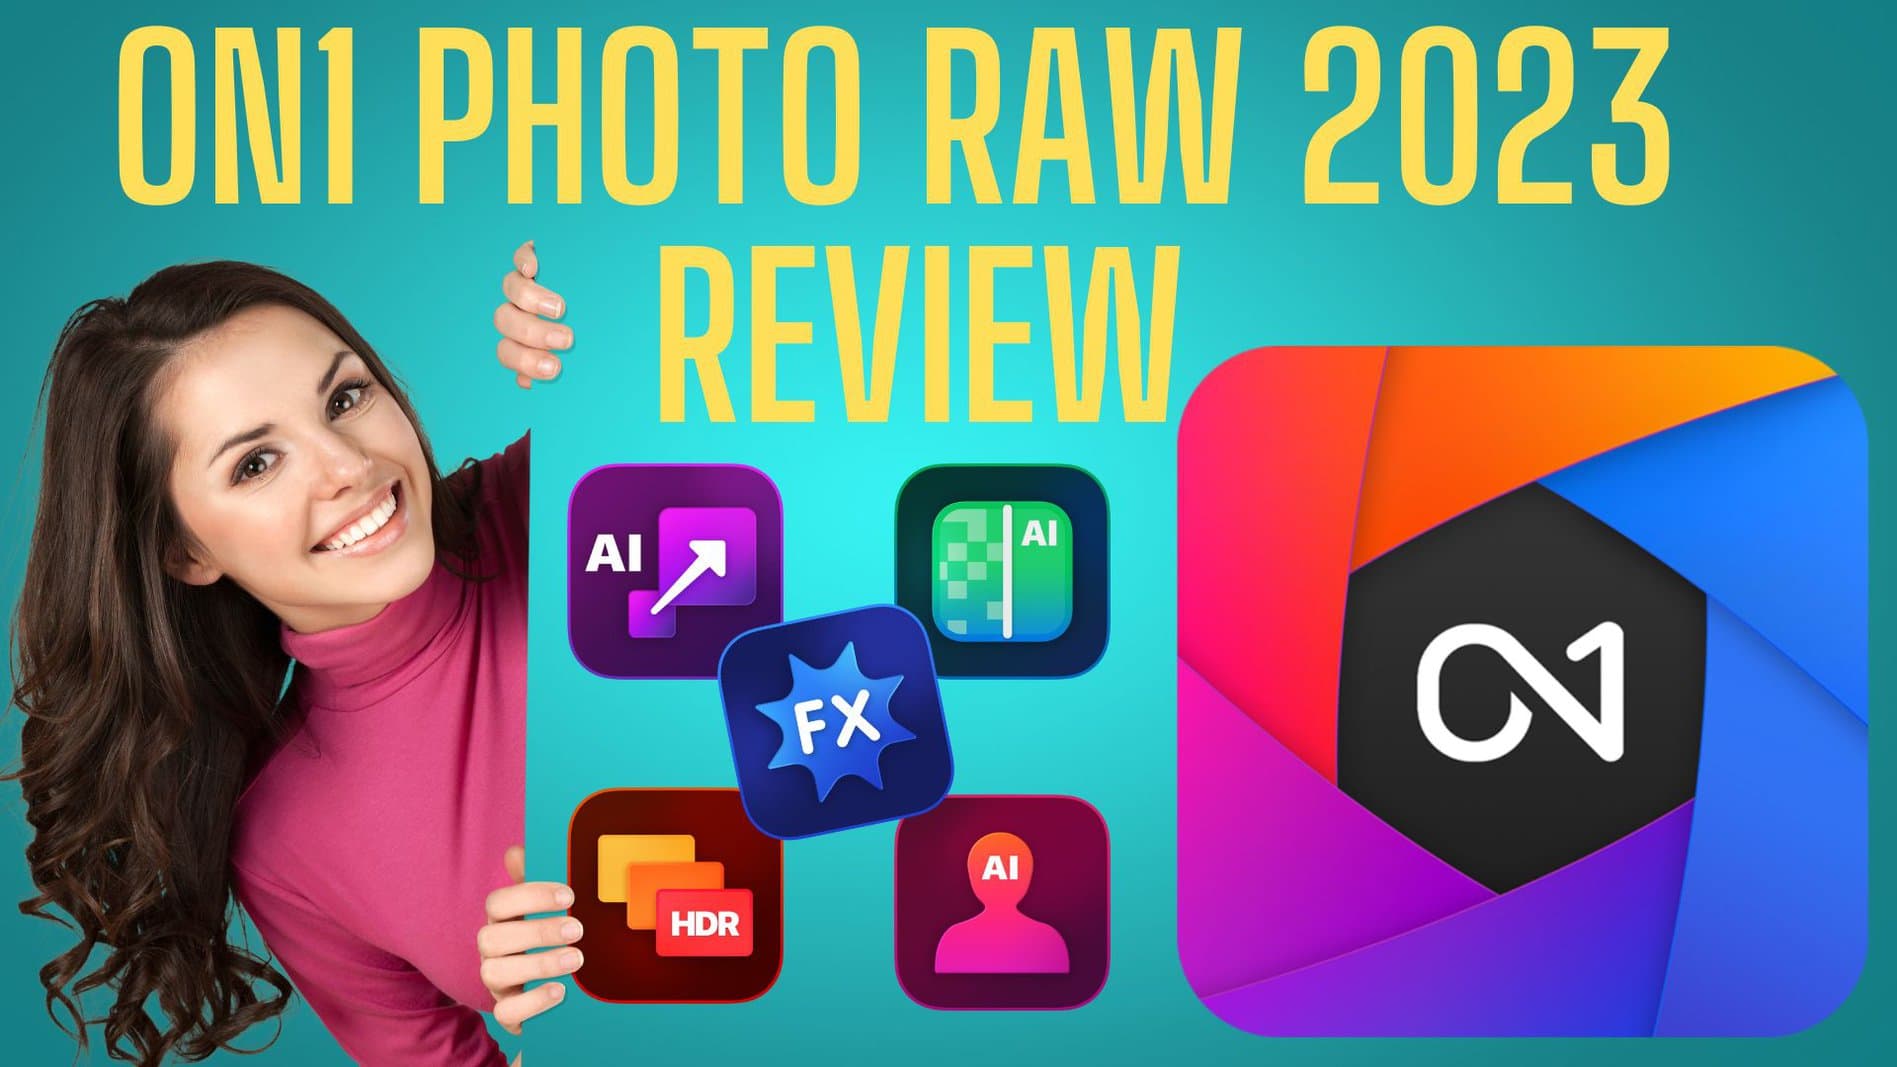 ON1 Photo Raw 2023 Review